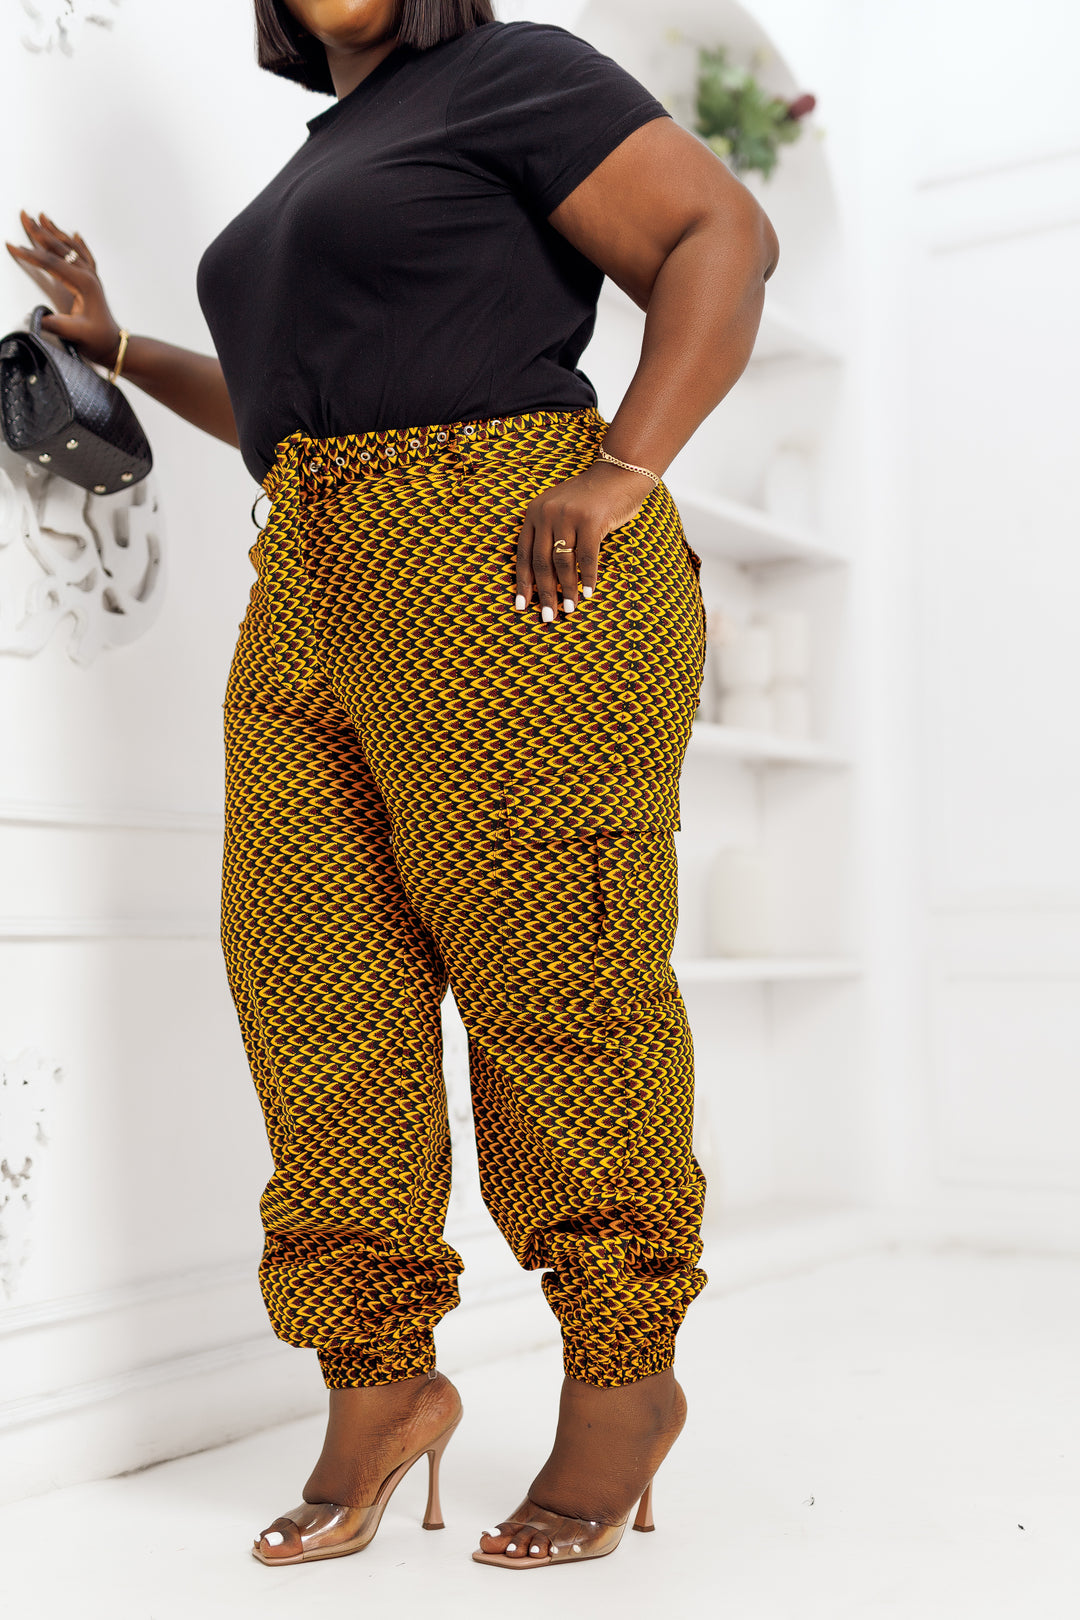 FUNBI AFRICAN PRINT JOGGERS PRE-ORDER [Ships on or before MAY 20TH]